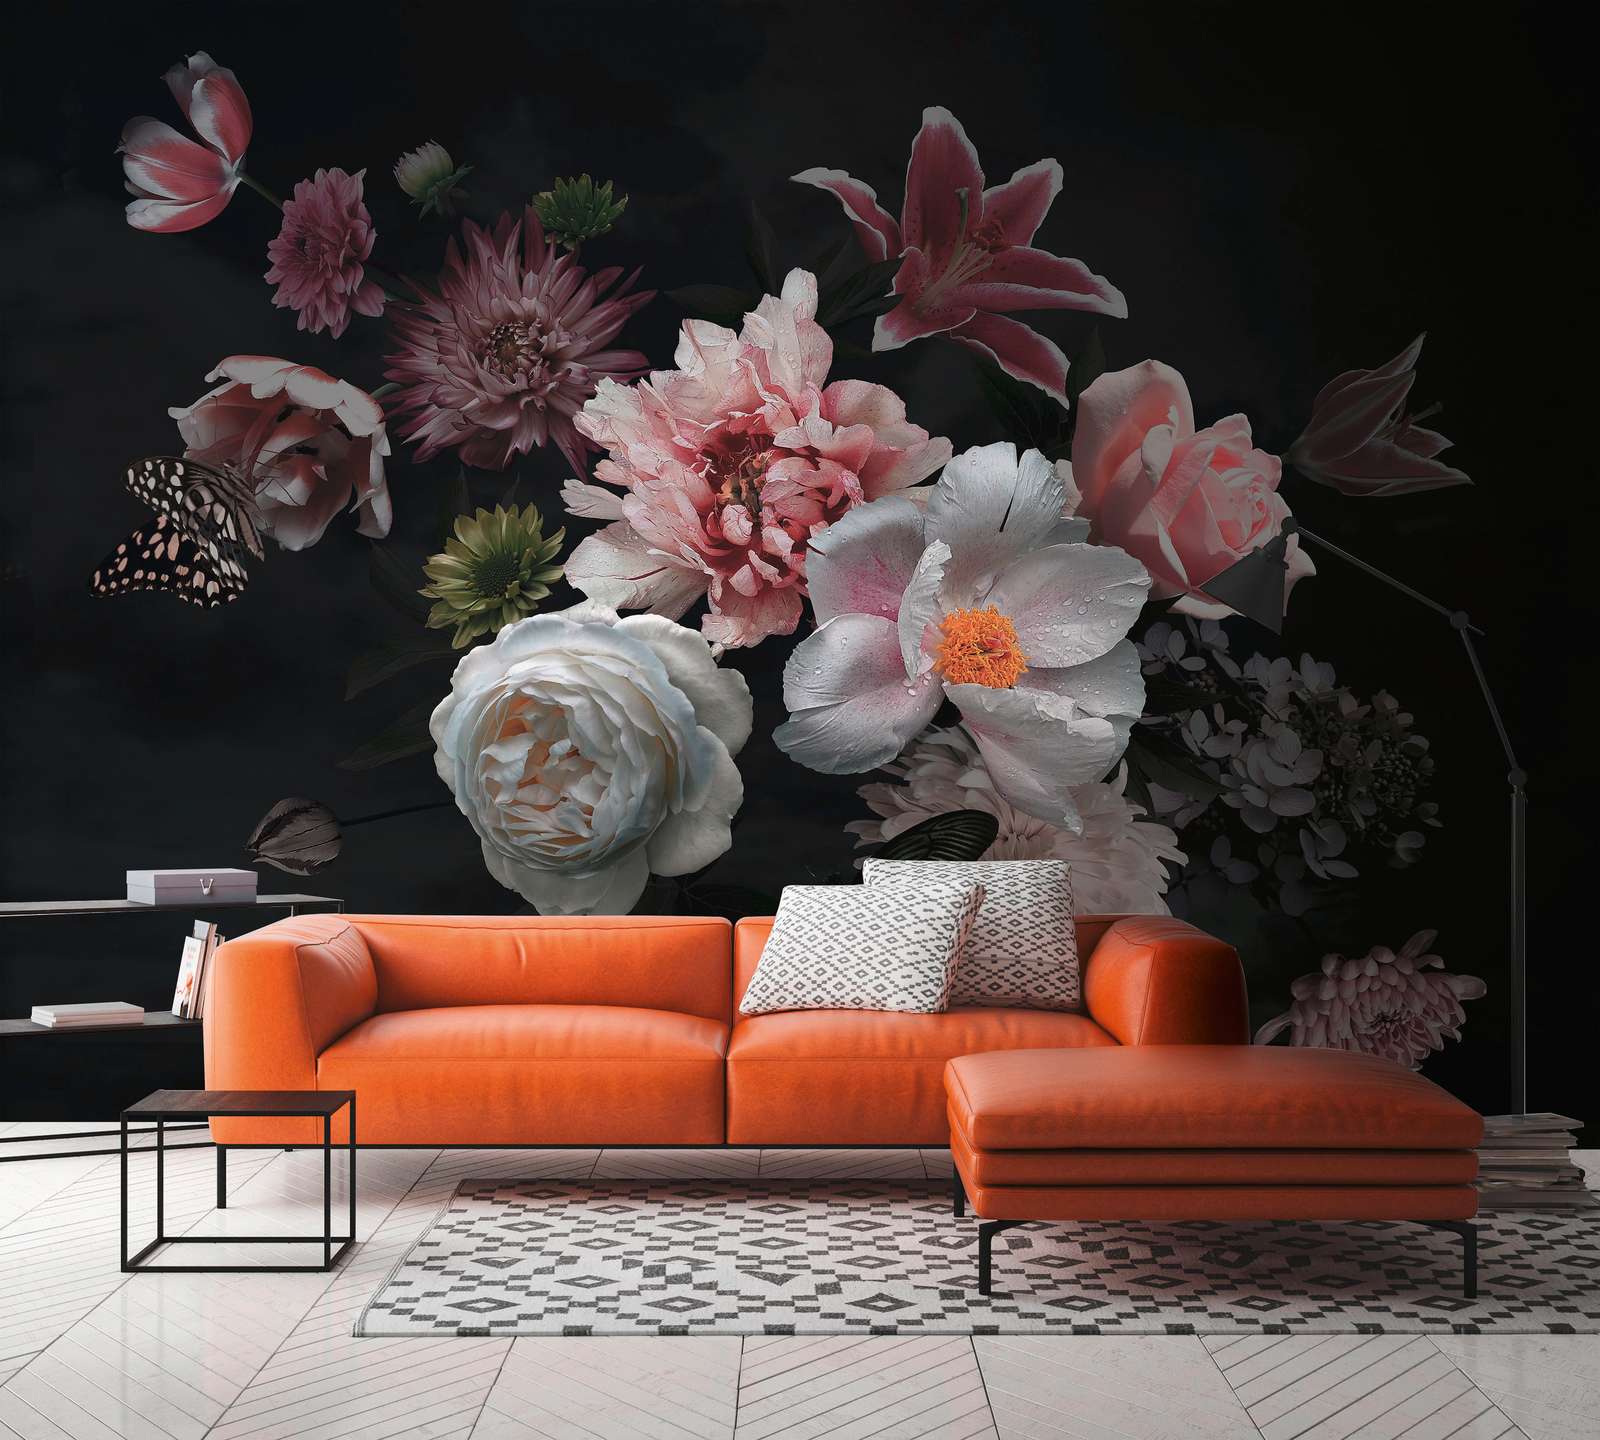             Various Flowers with Butterfly Wallpaper - Black, Pink, White
        